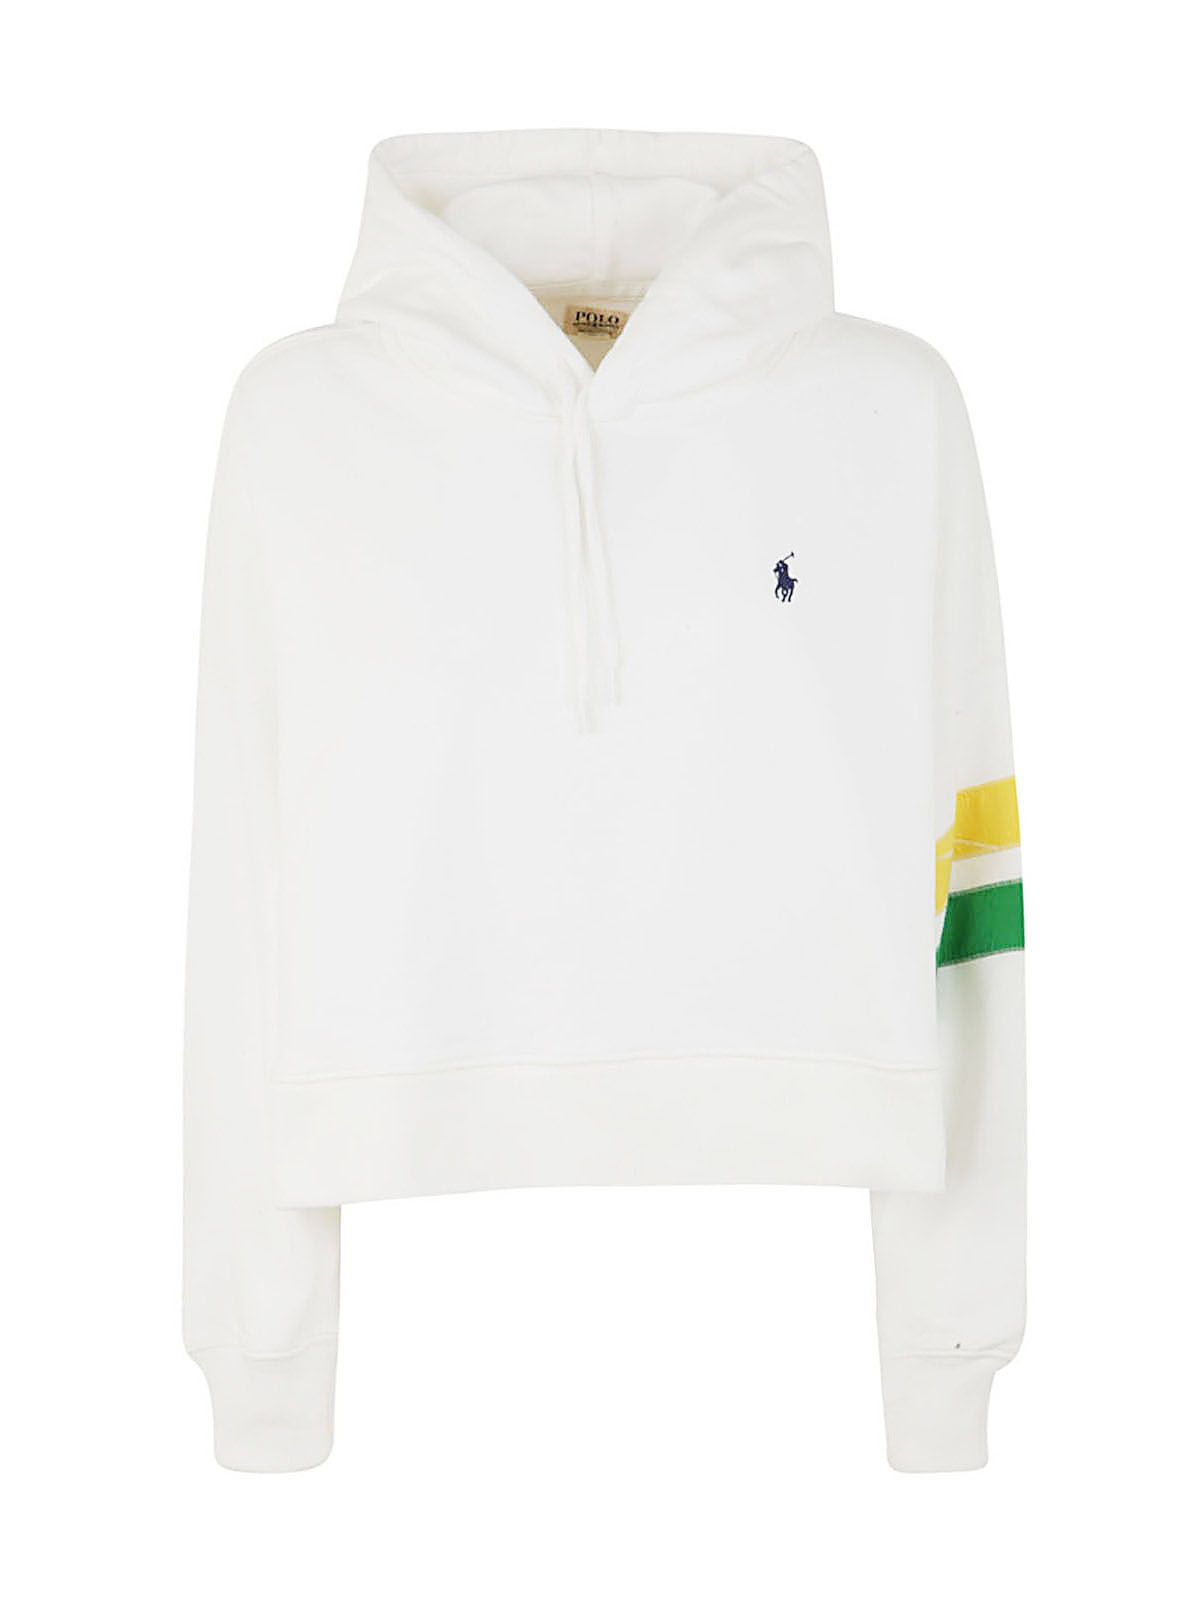 Polo Ralph Lauren "polo" Writed Back Cropped Hoodie